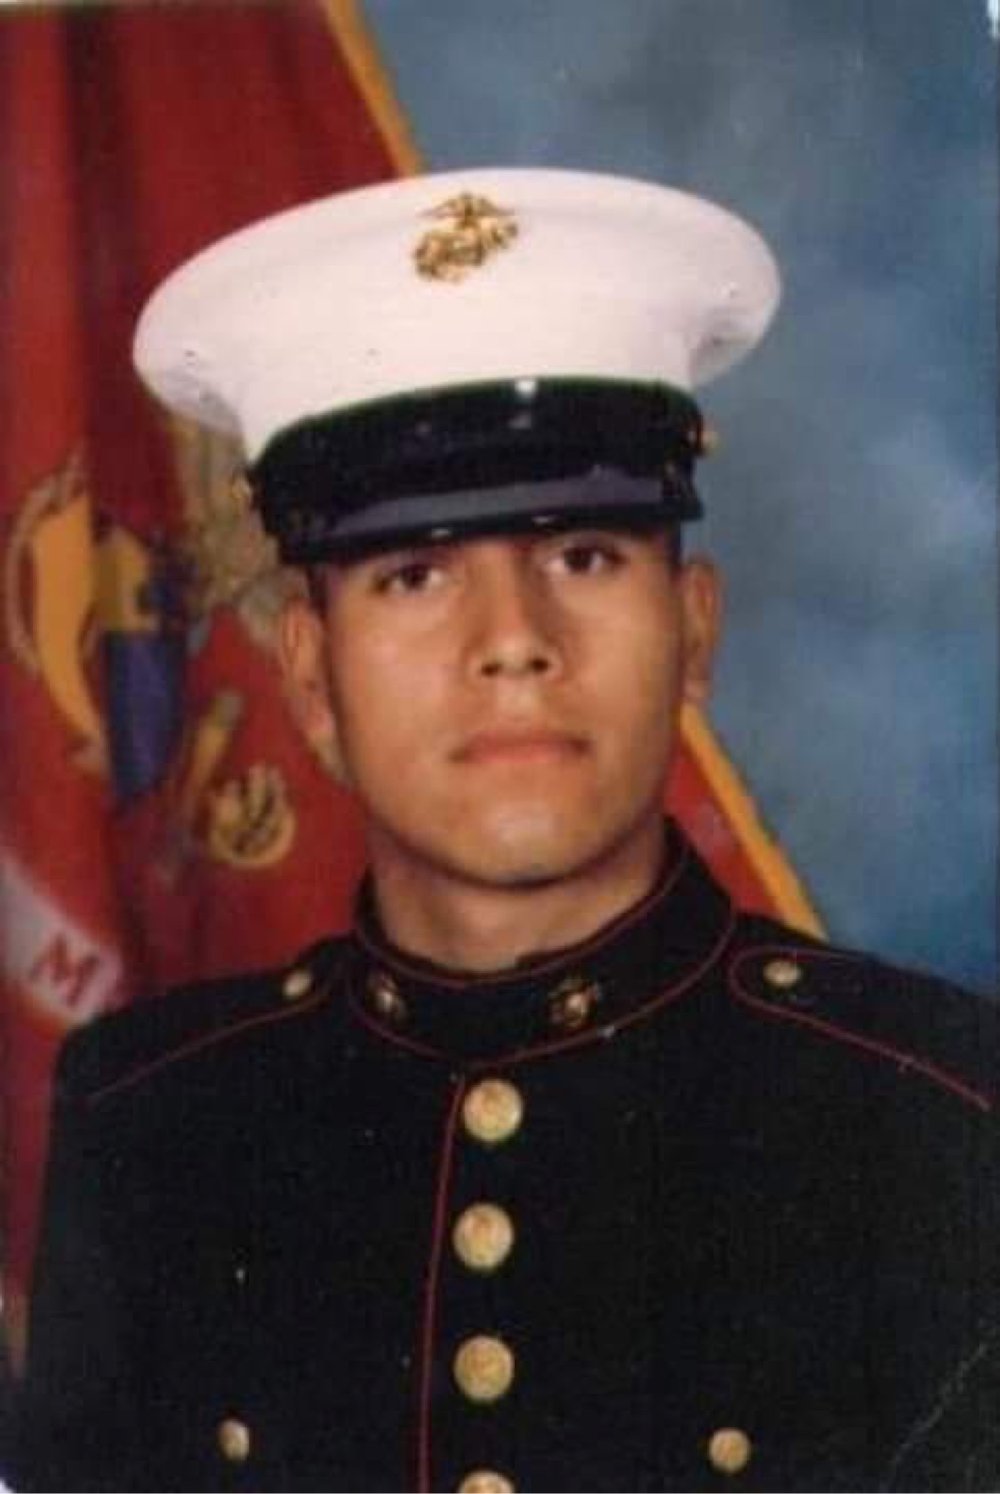 Hector Ballesteros, Childhood Arrival, Deported Veterans, Immigrants, Serving the Nation, U.S military, Joe Biden, deportation, undocumented, failed system